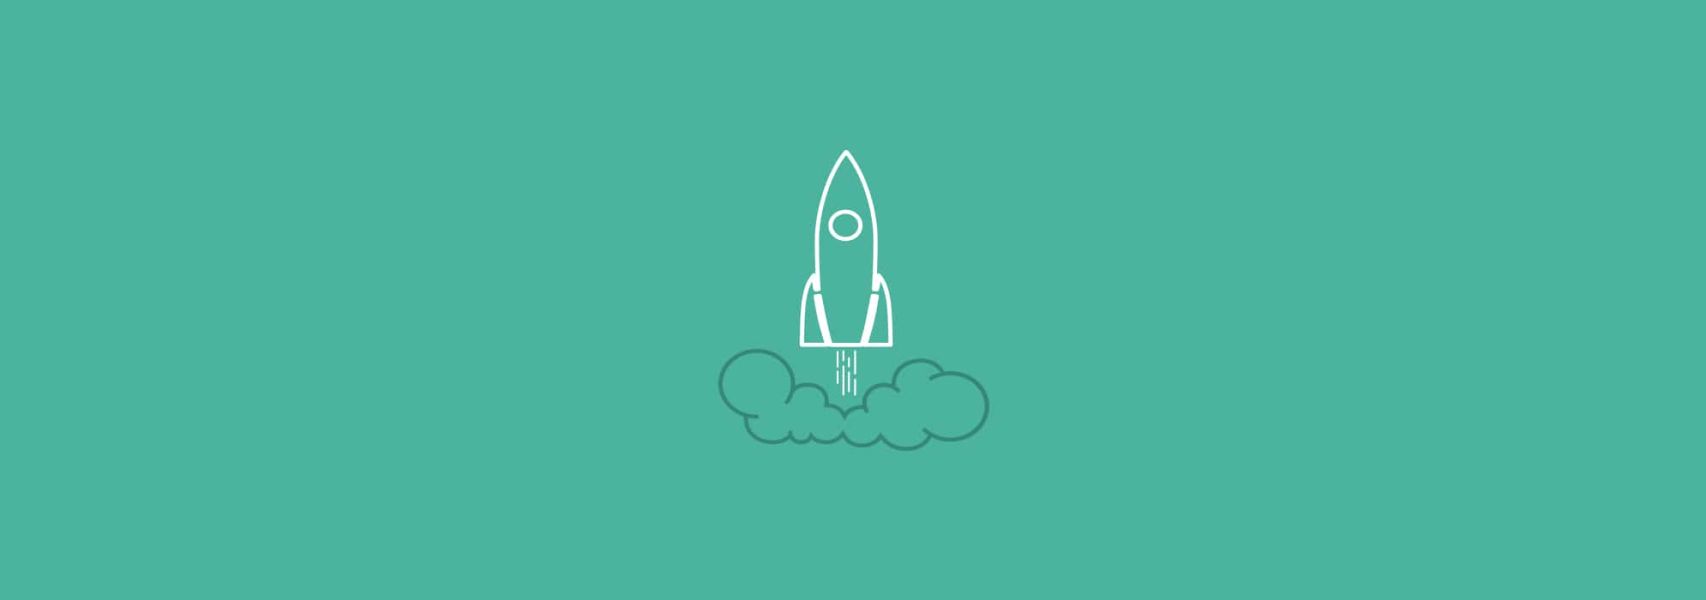 Rocket flying through the air on green background. Marketing teams can assist start-ups in preparing for pitching to and attracting investors.